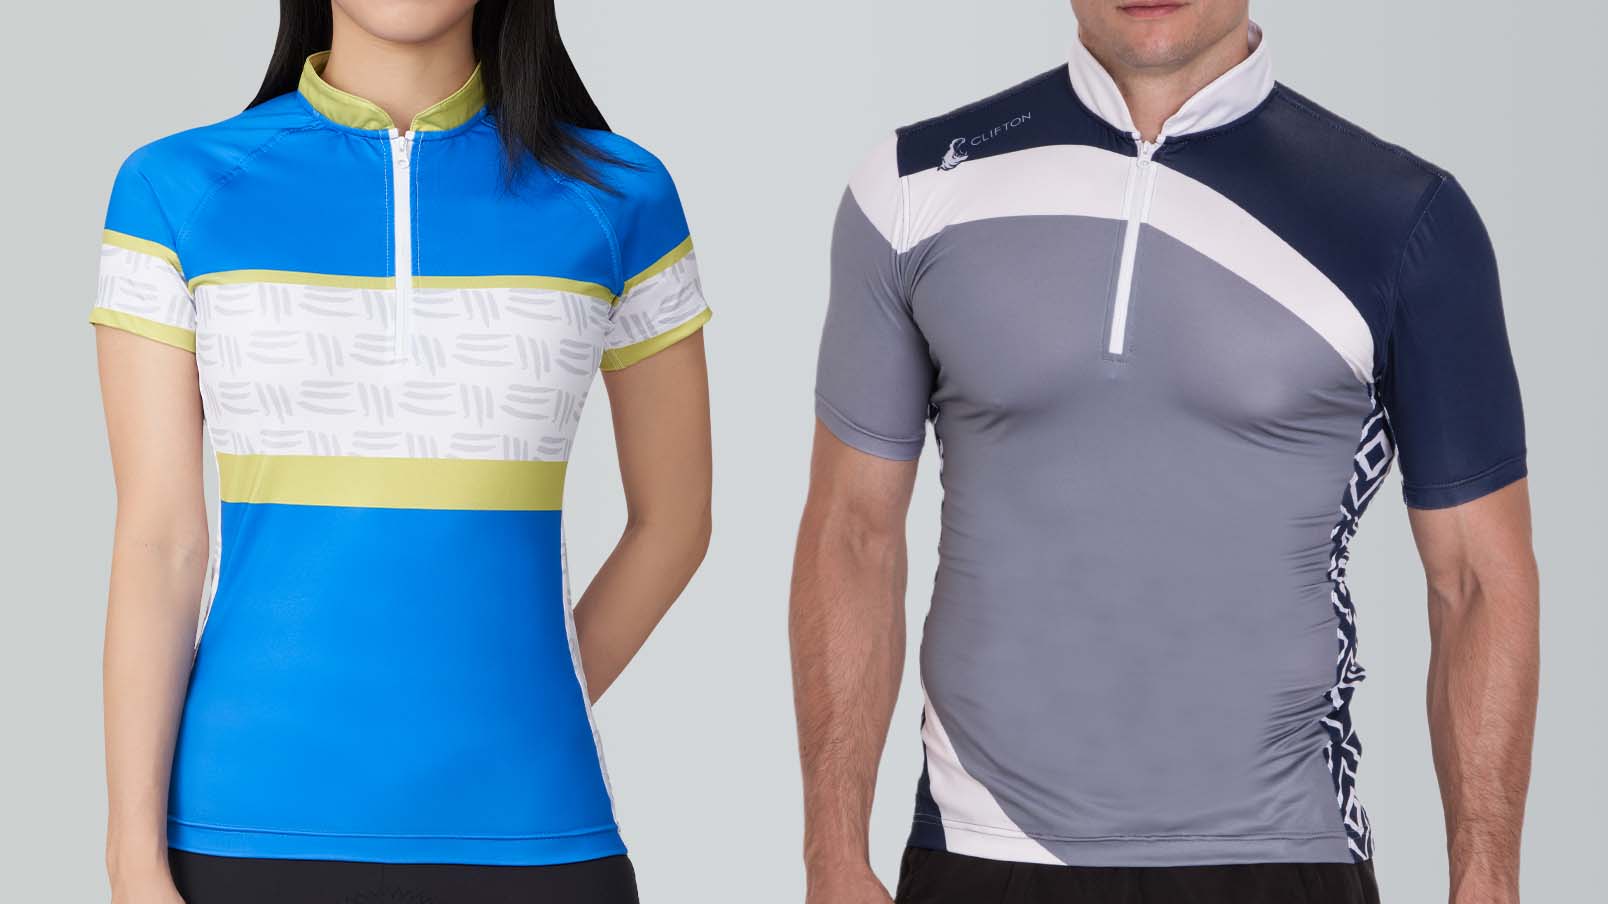 Create Your Own Cycling Jersey - Design Your Own Bike Jersey